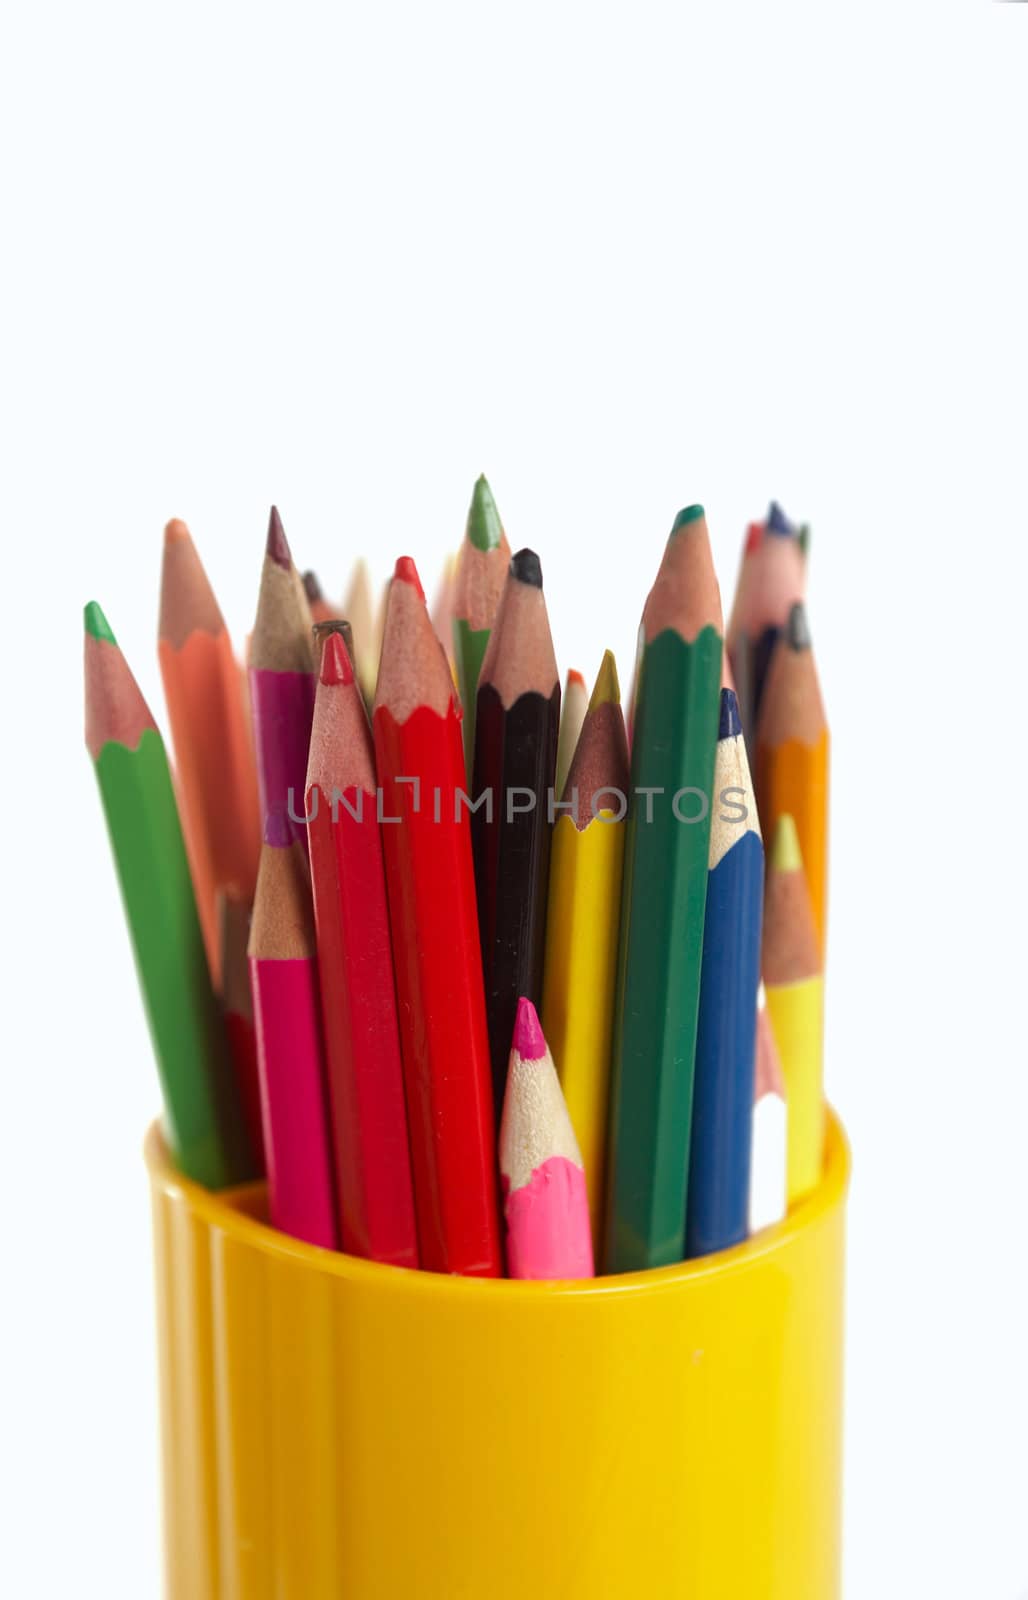 An image of  pencils in a plastic glass